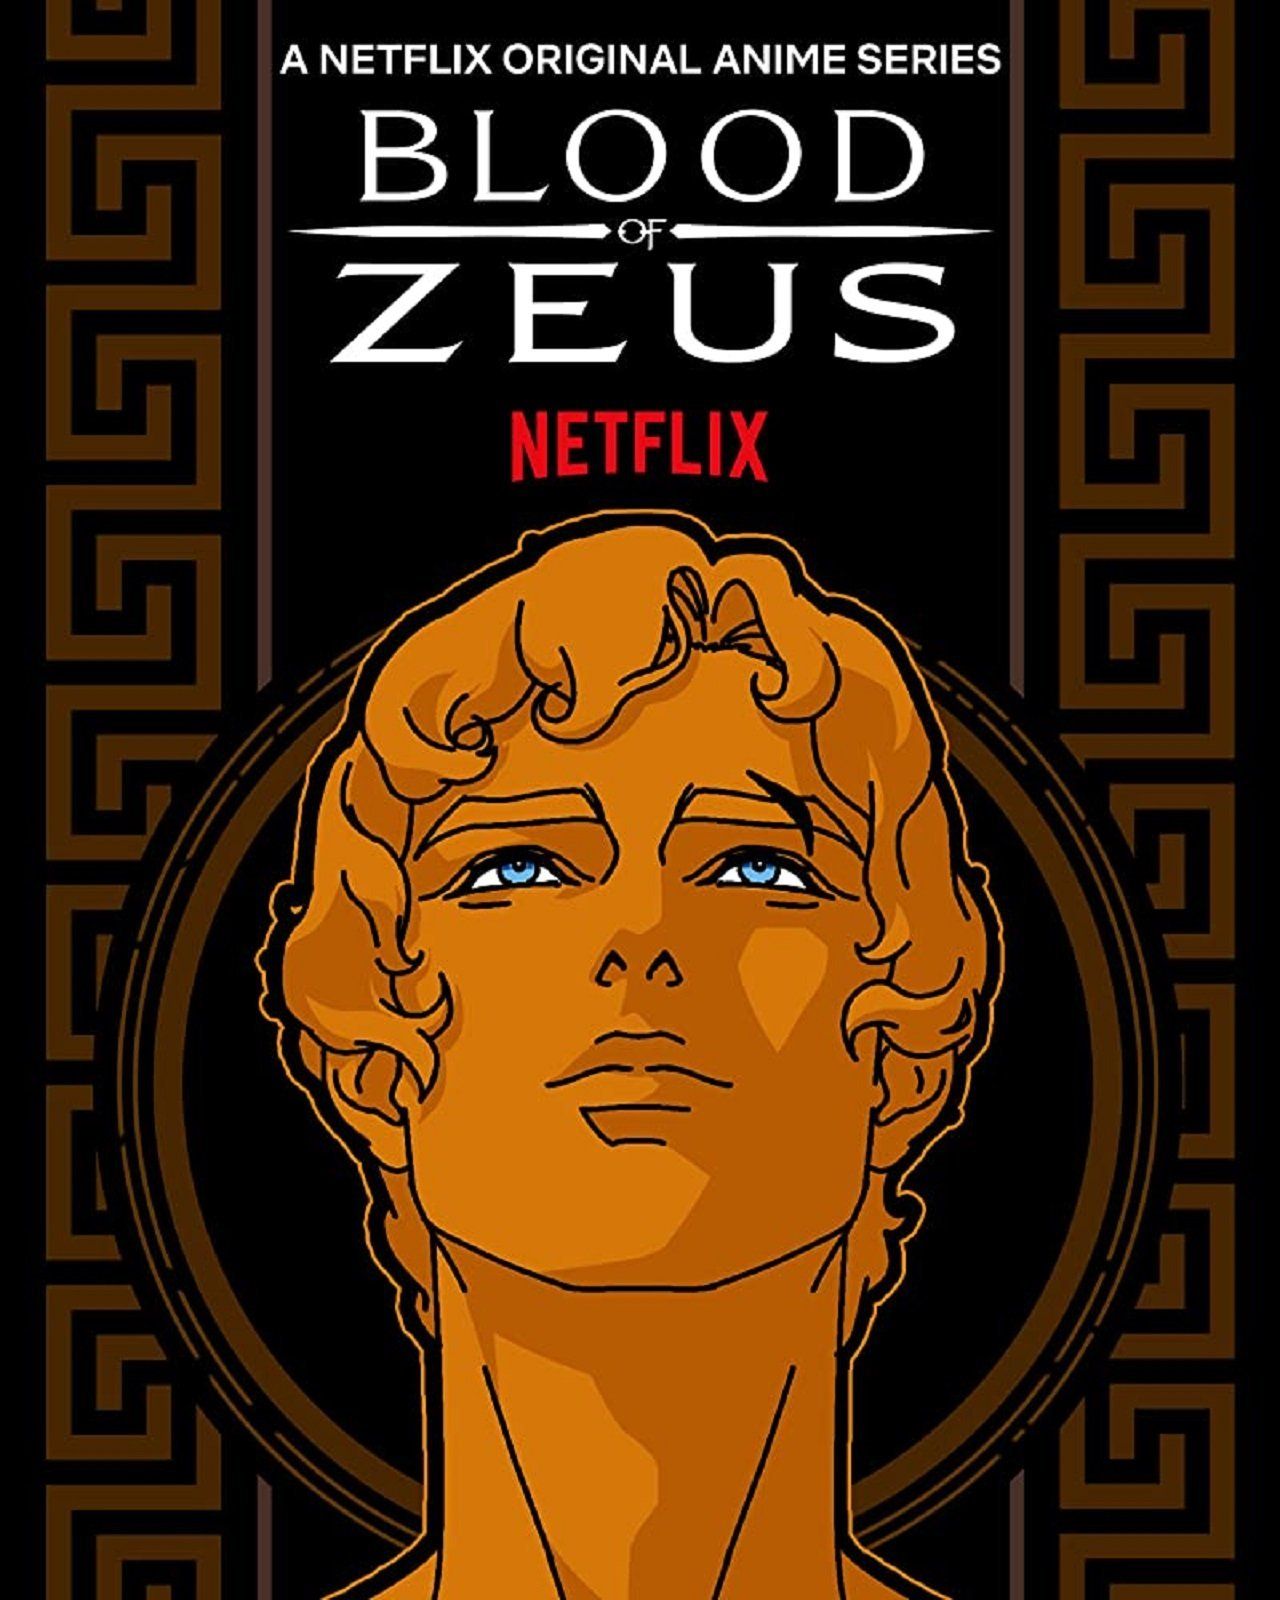 Your excitable history lesson on Netflix's Blood of Zeus